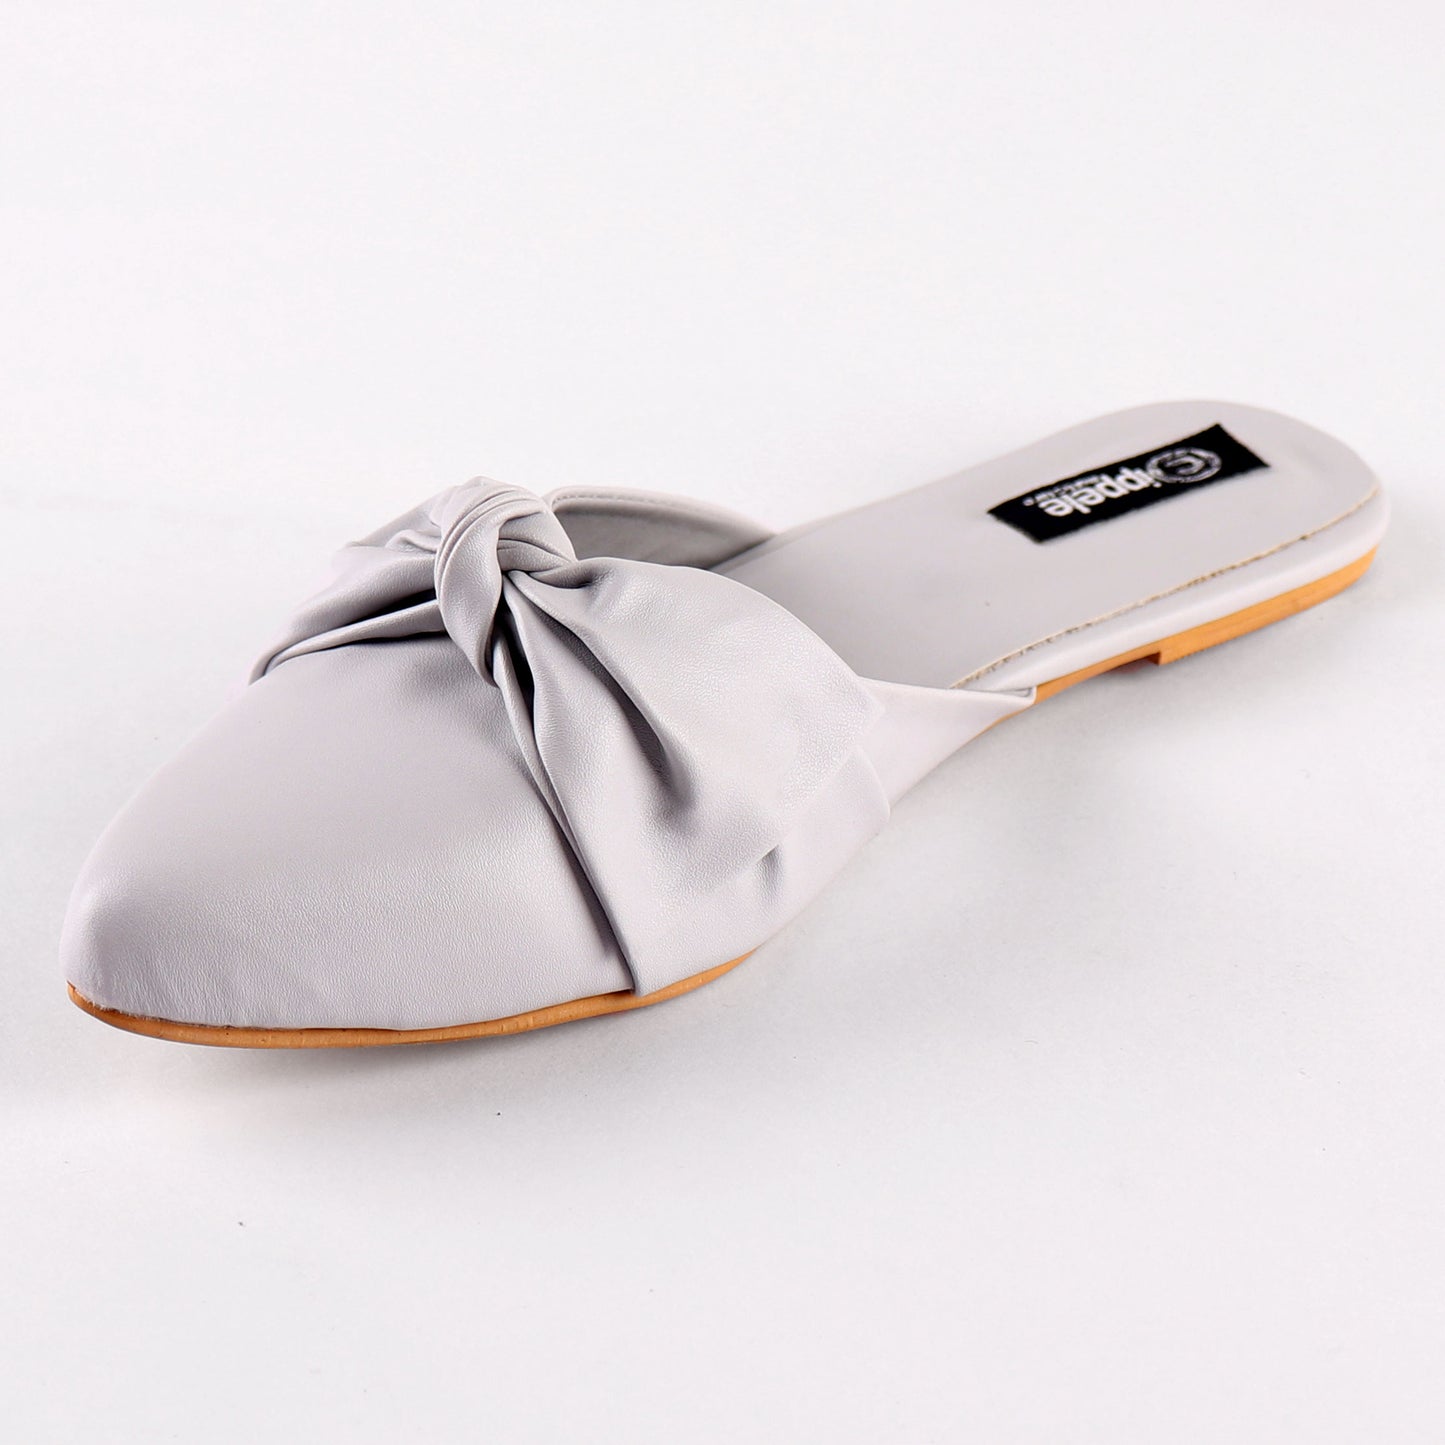 Foot Wear,The Charismatic Bow Mules in Grey - Cippele Multi Store